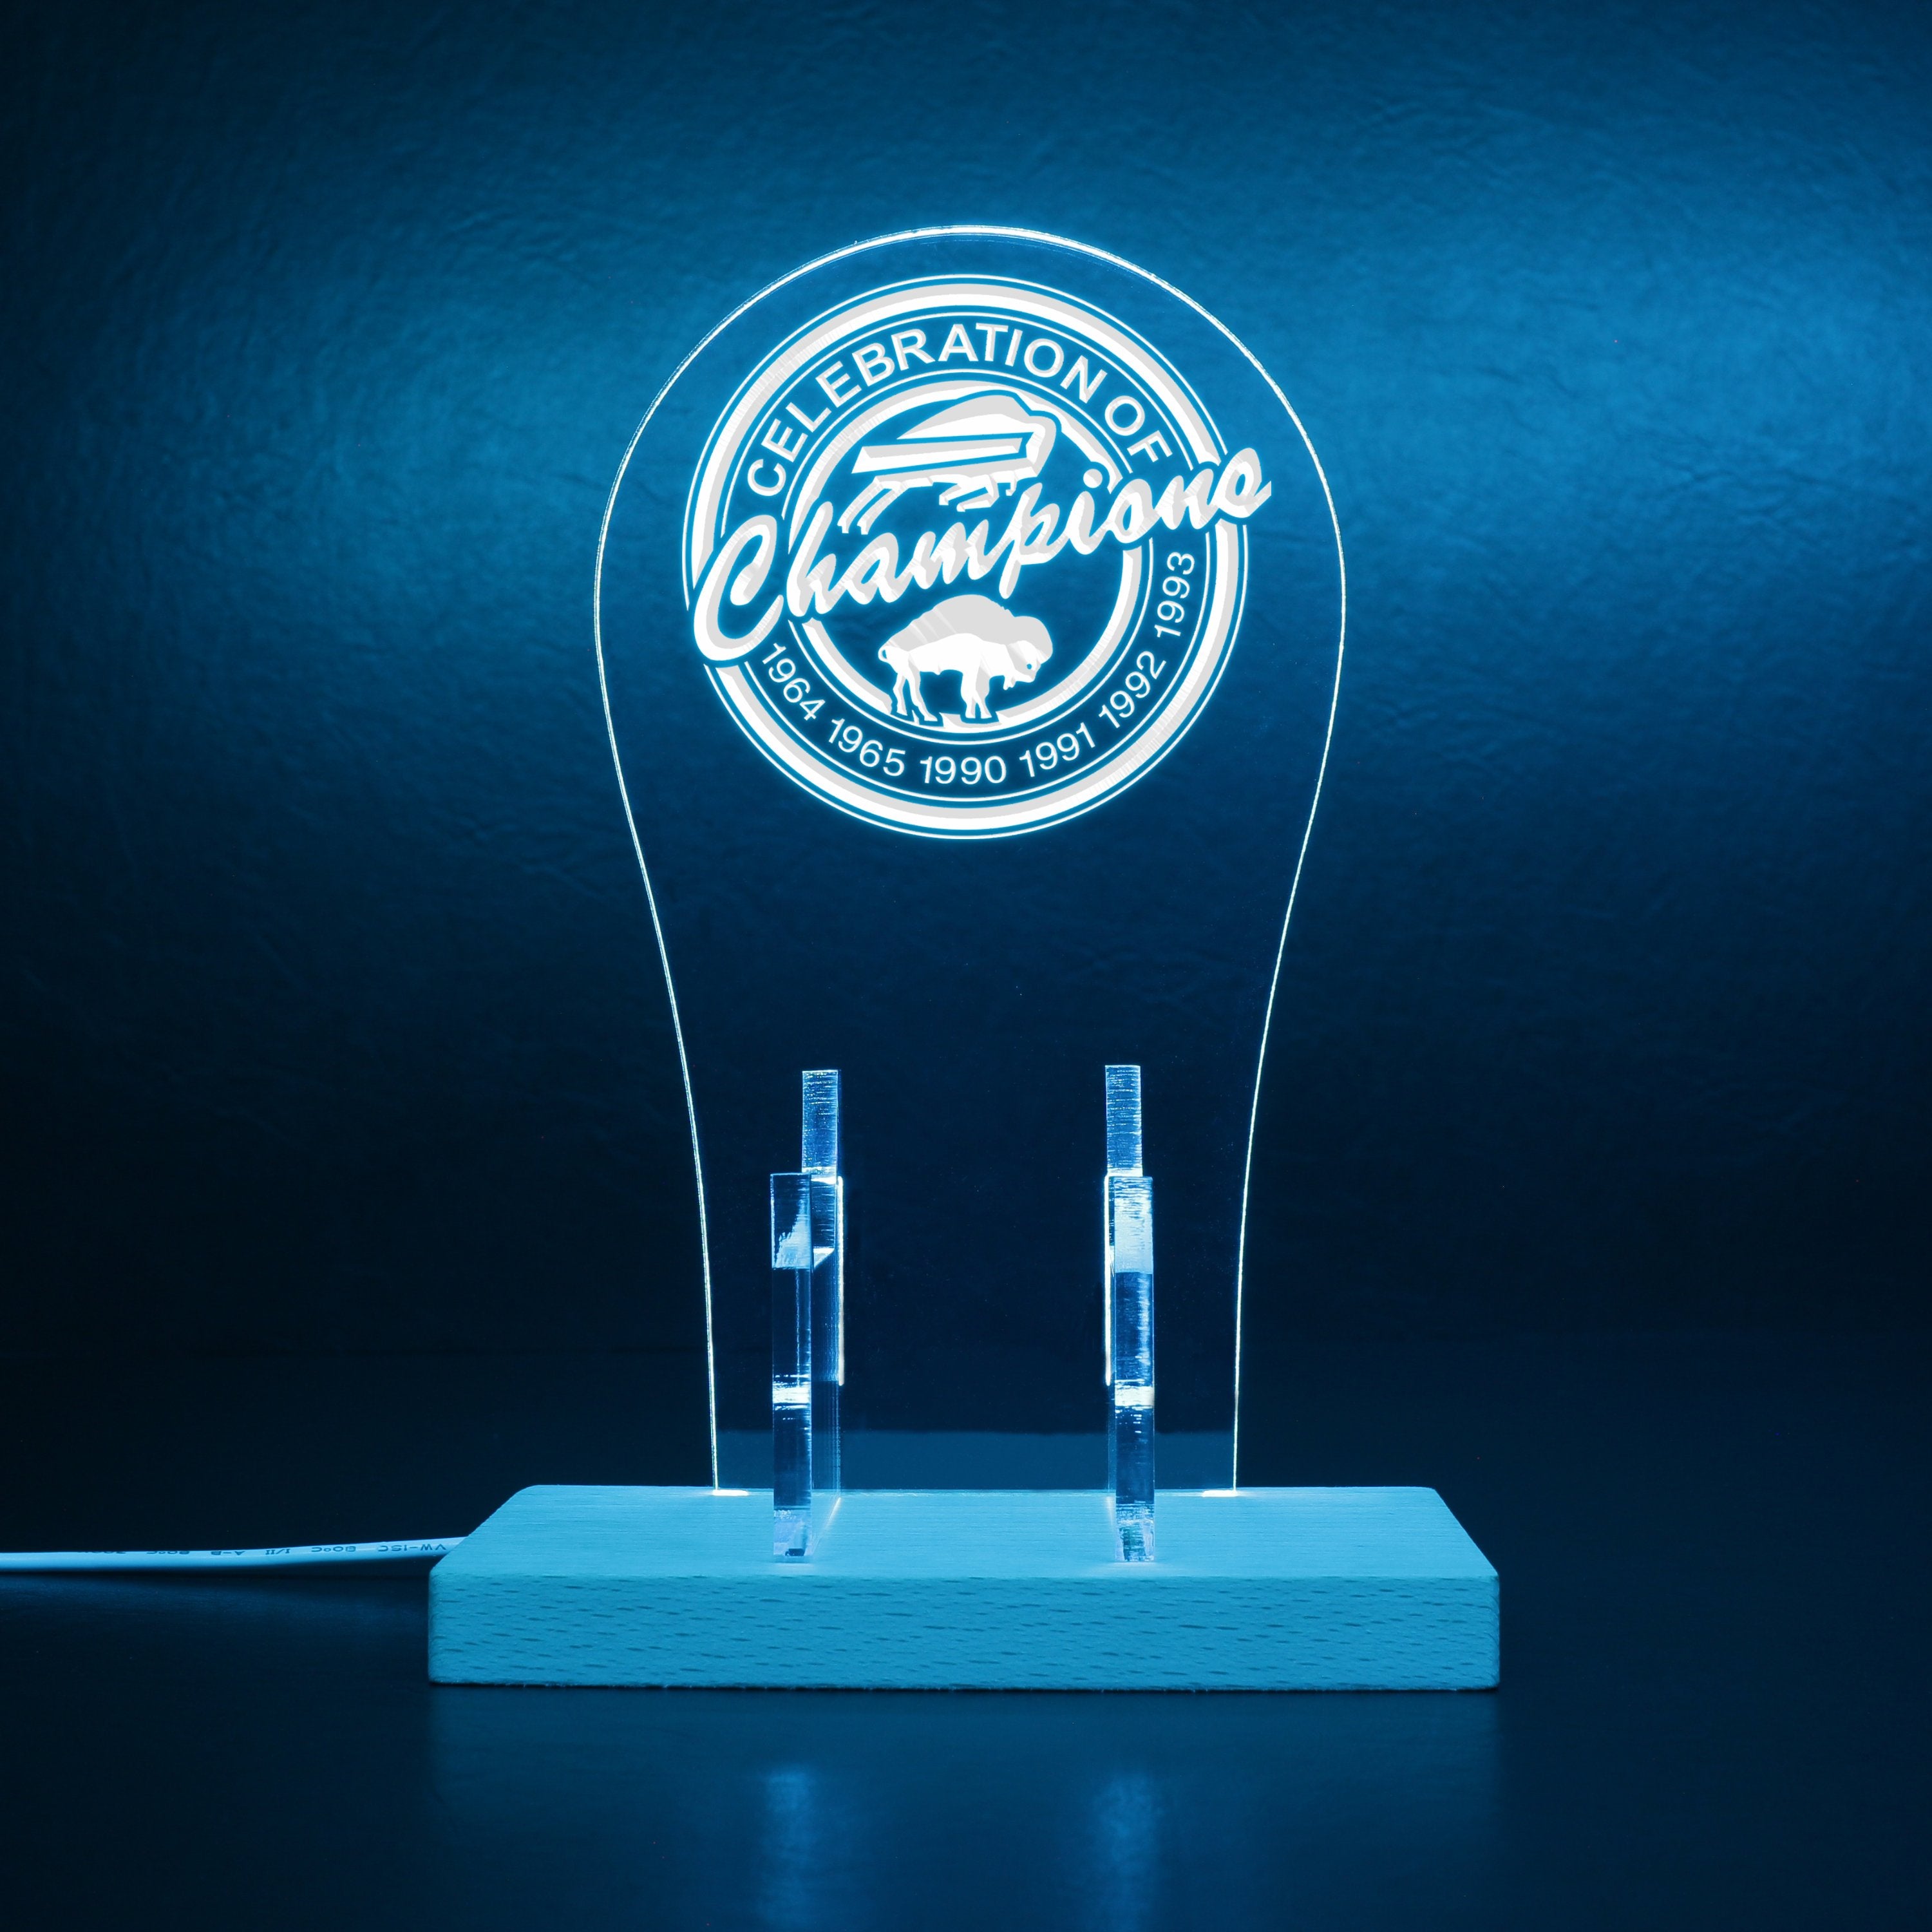 Buffalo Bills Celebration of Champions logo with all AFC and AFL Championships RGB LED Gaming Headset Controller Stand